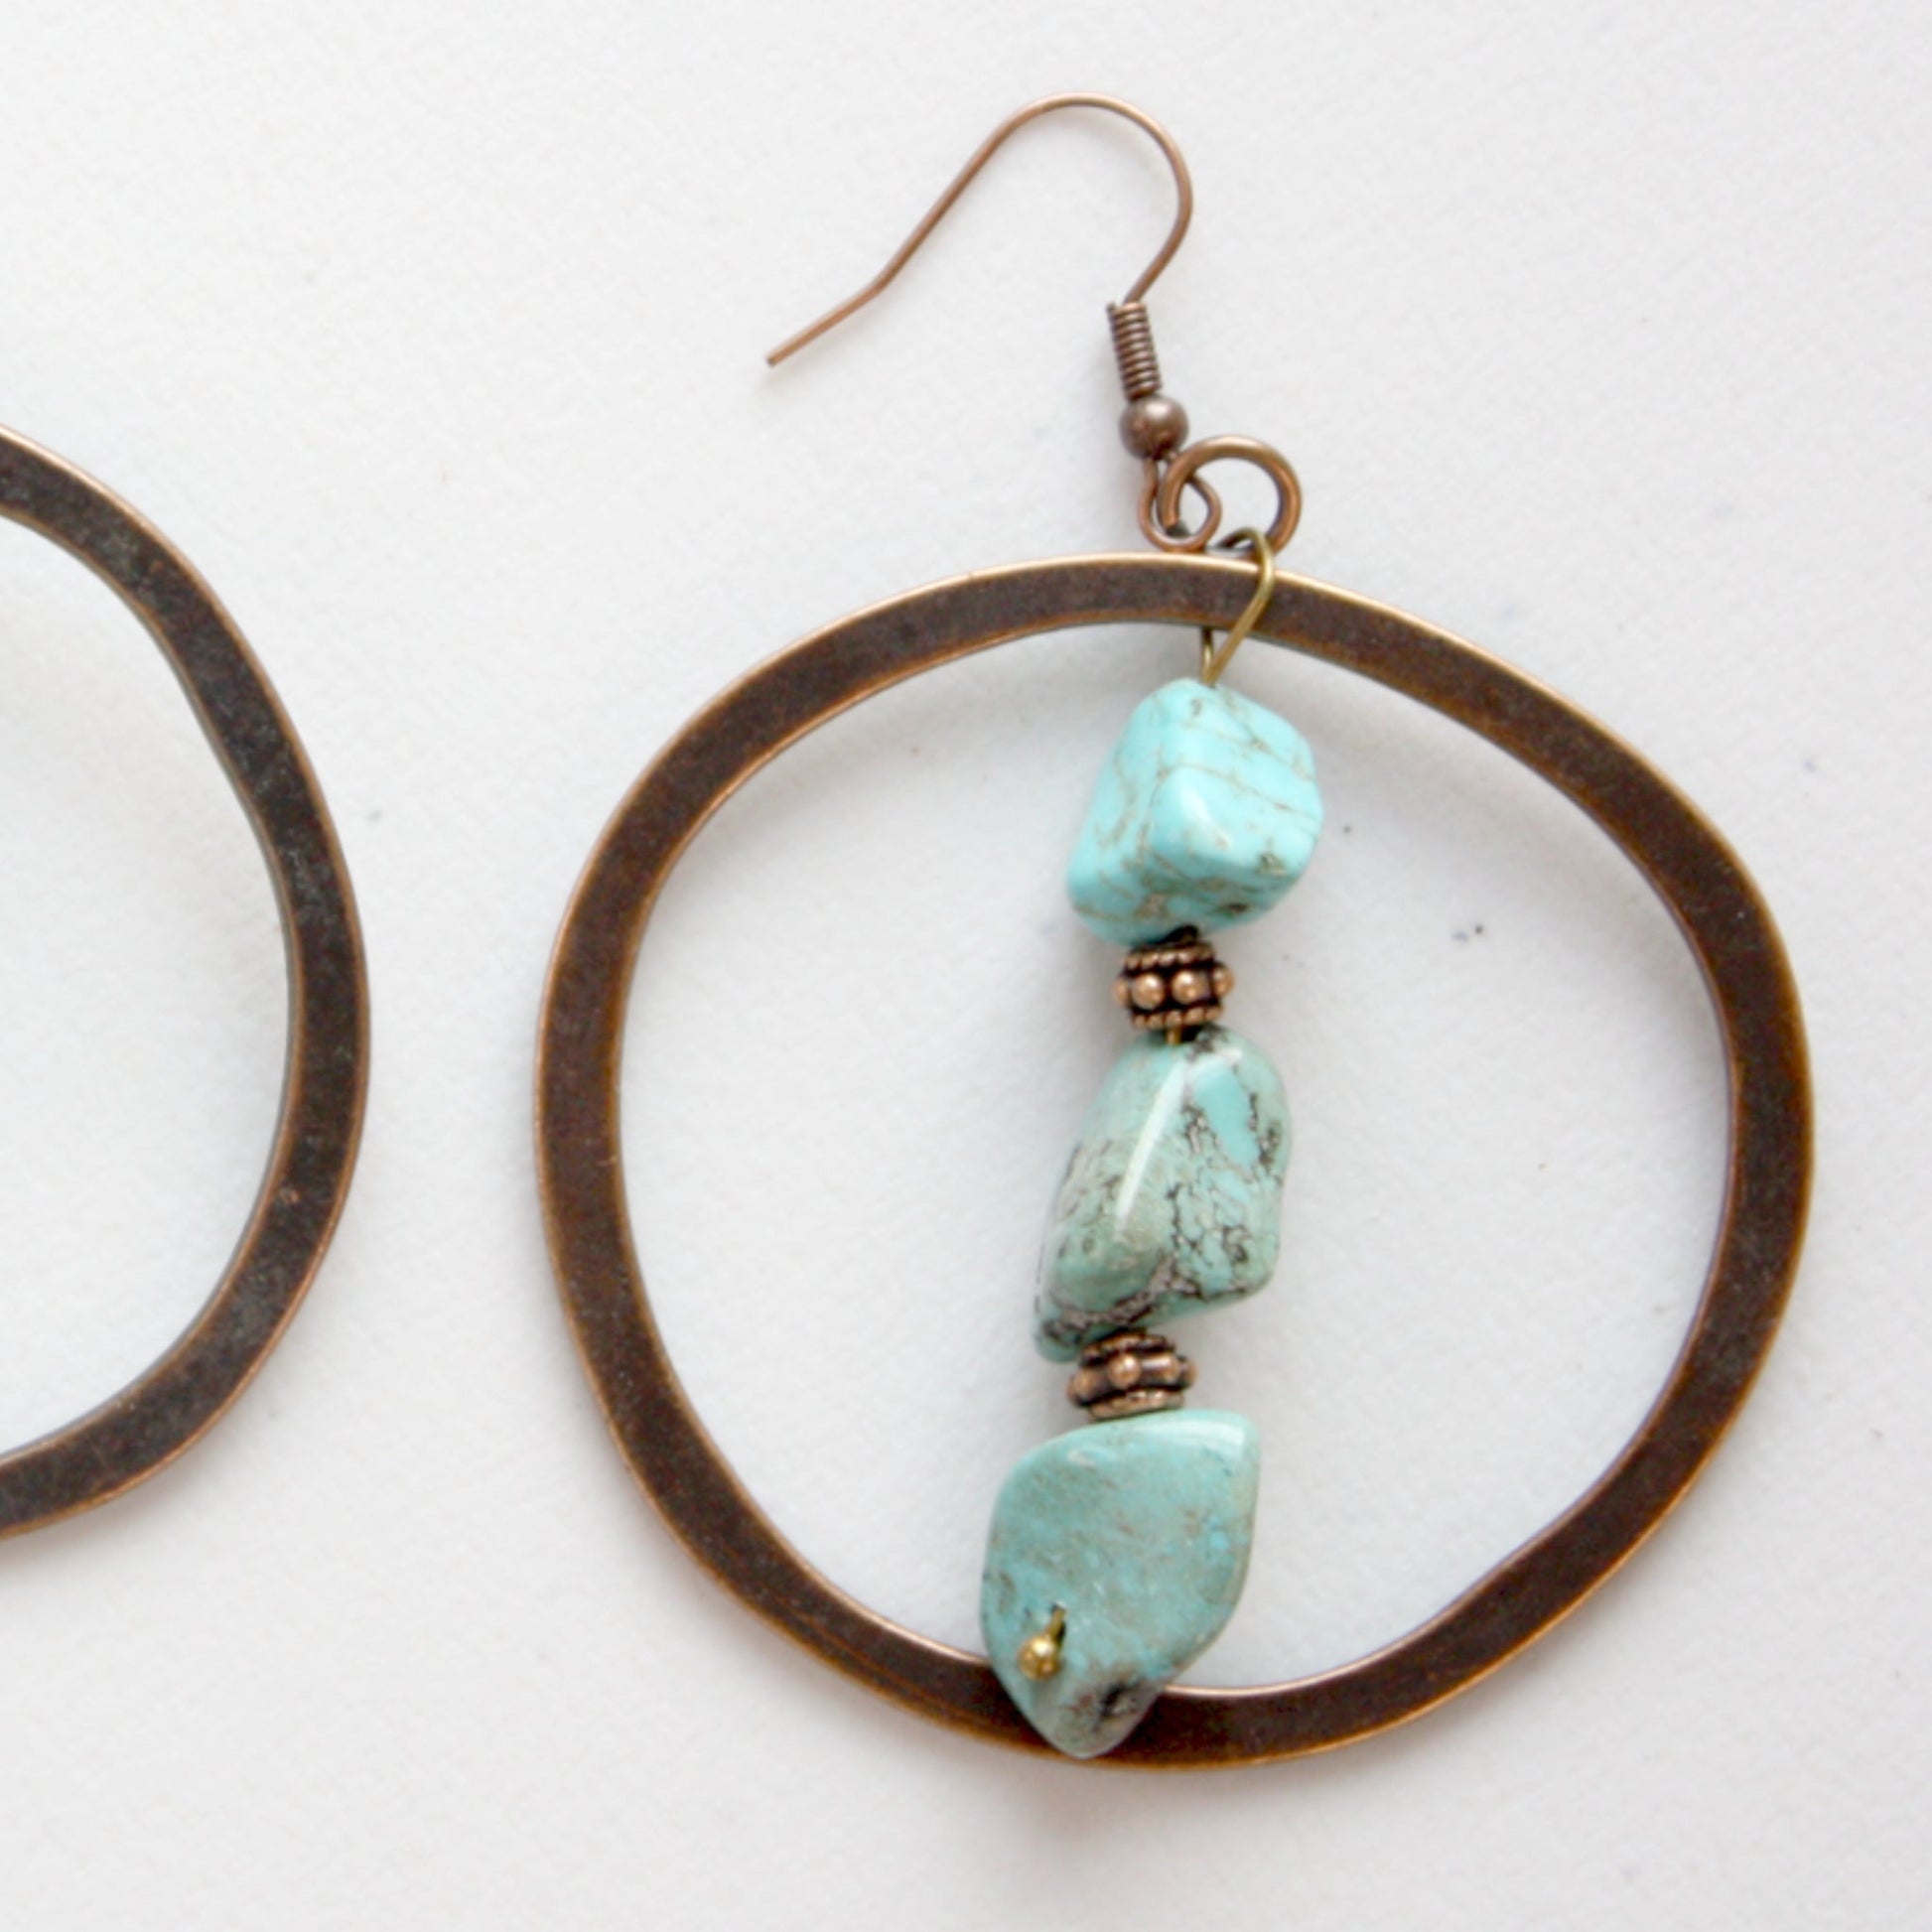 Copper Hoop Earrings with Blue Turquoise and Copper - Made in the USA